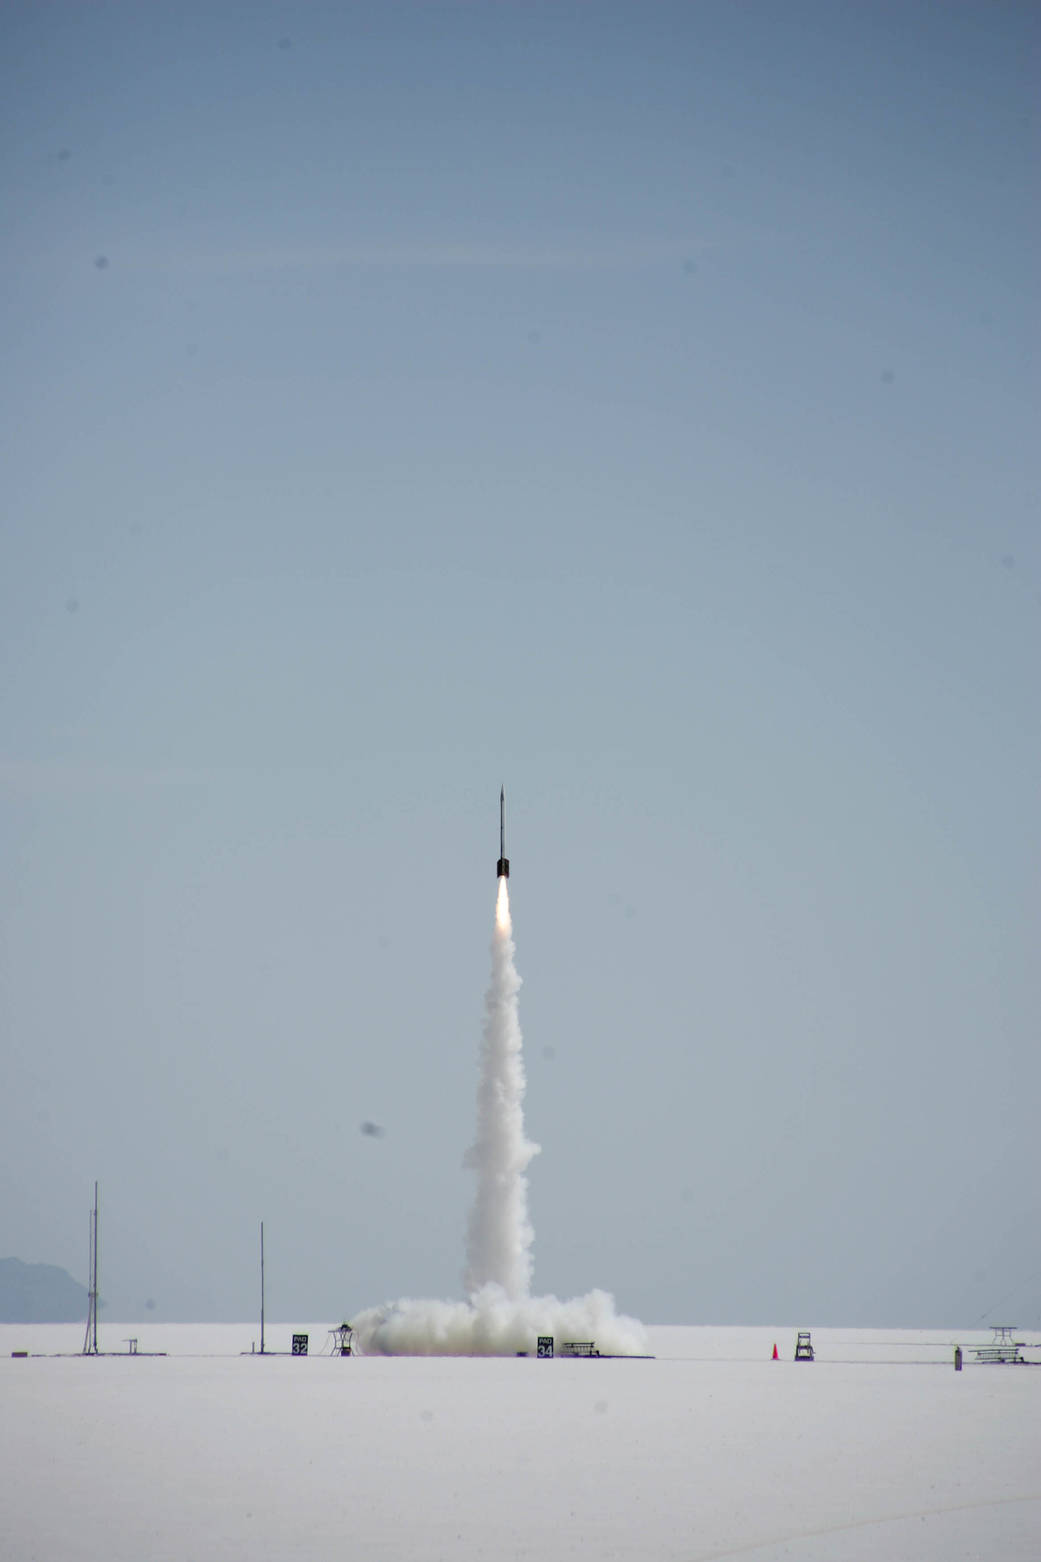 A student-built rocket lifts off the brilliant white hardpan of the Bonneville Salt Flats in Tooele County, Utah, May 17, during